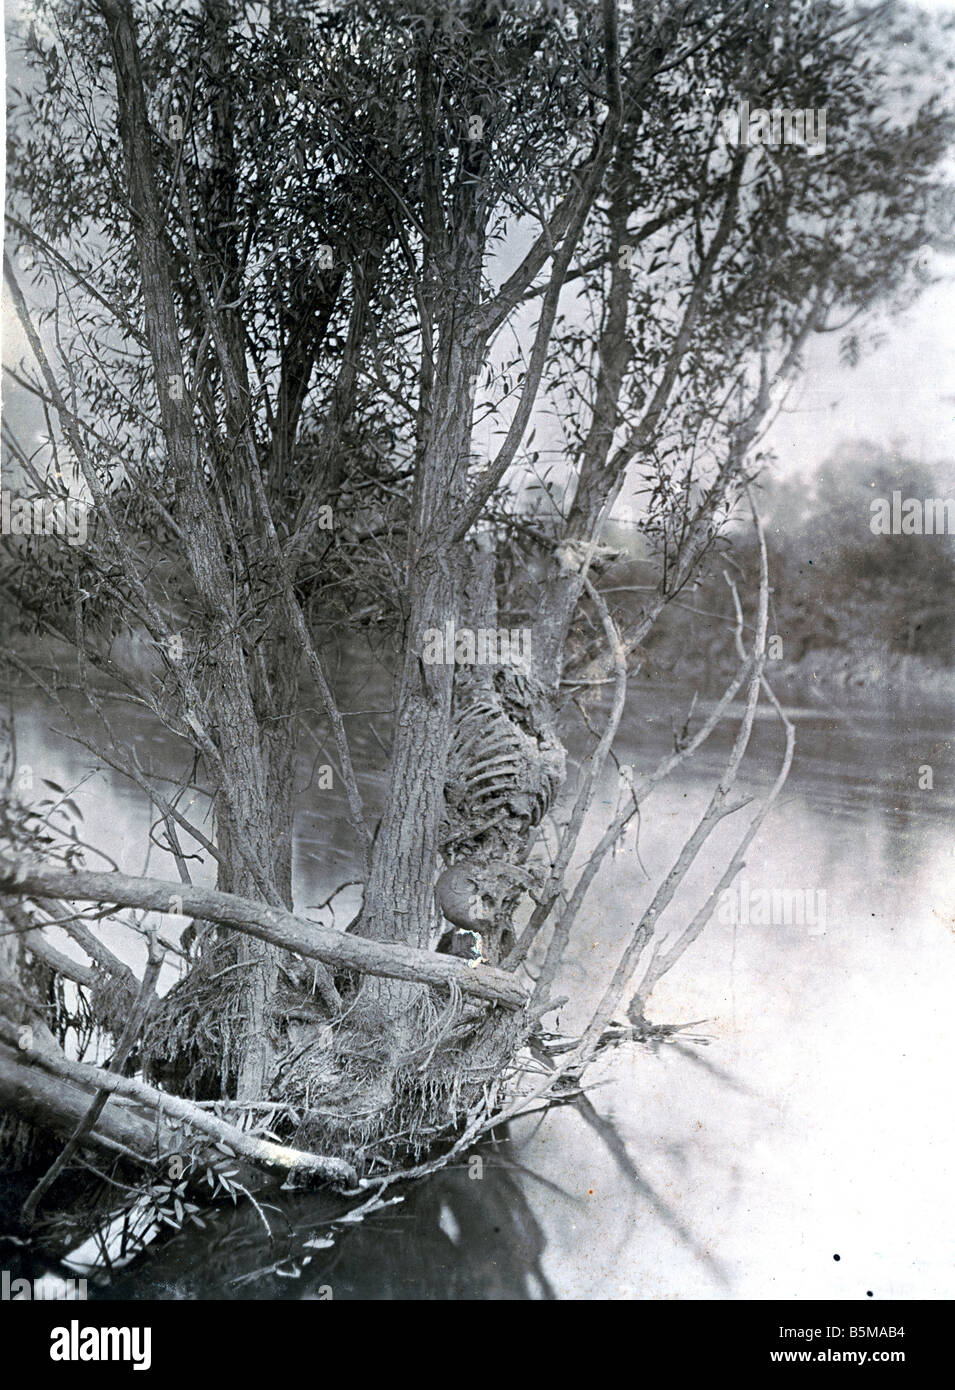 2 G55 W1 1915 WWI Drowned body at the Aisne History WWI Western Front Drowned body Amateur photo handwritten label on the back I Stock Photo